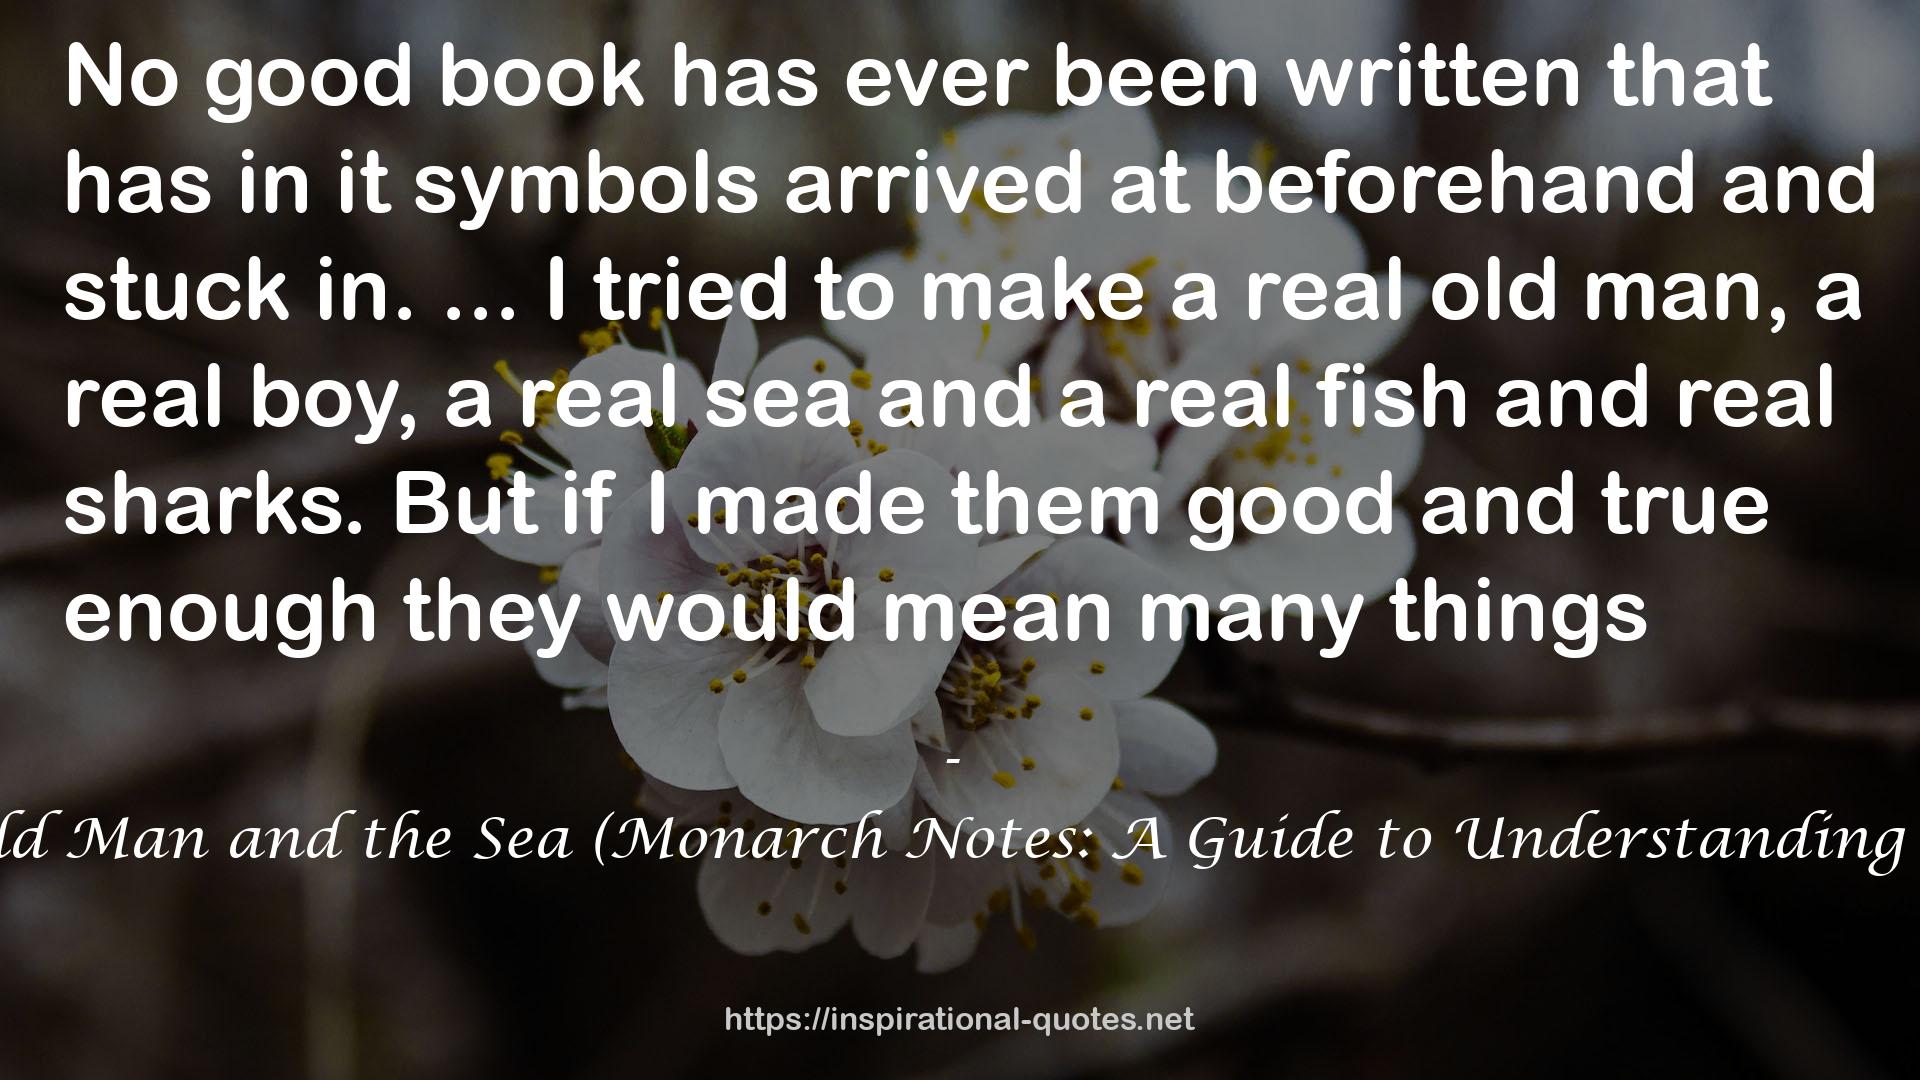 Ernest Hemingway's the Old Man and the Sea (Monarch Notes: A Guide to Understanding the World's Great Writing) QUOTES